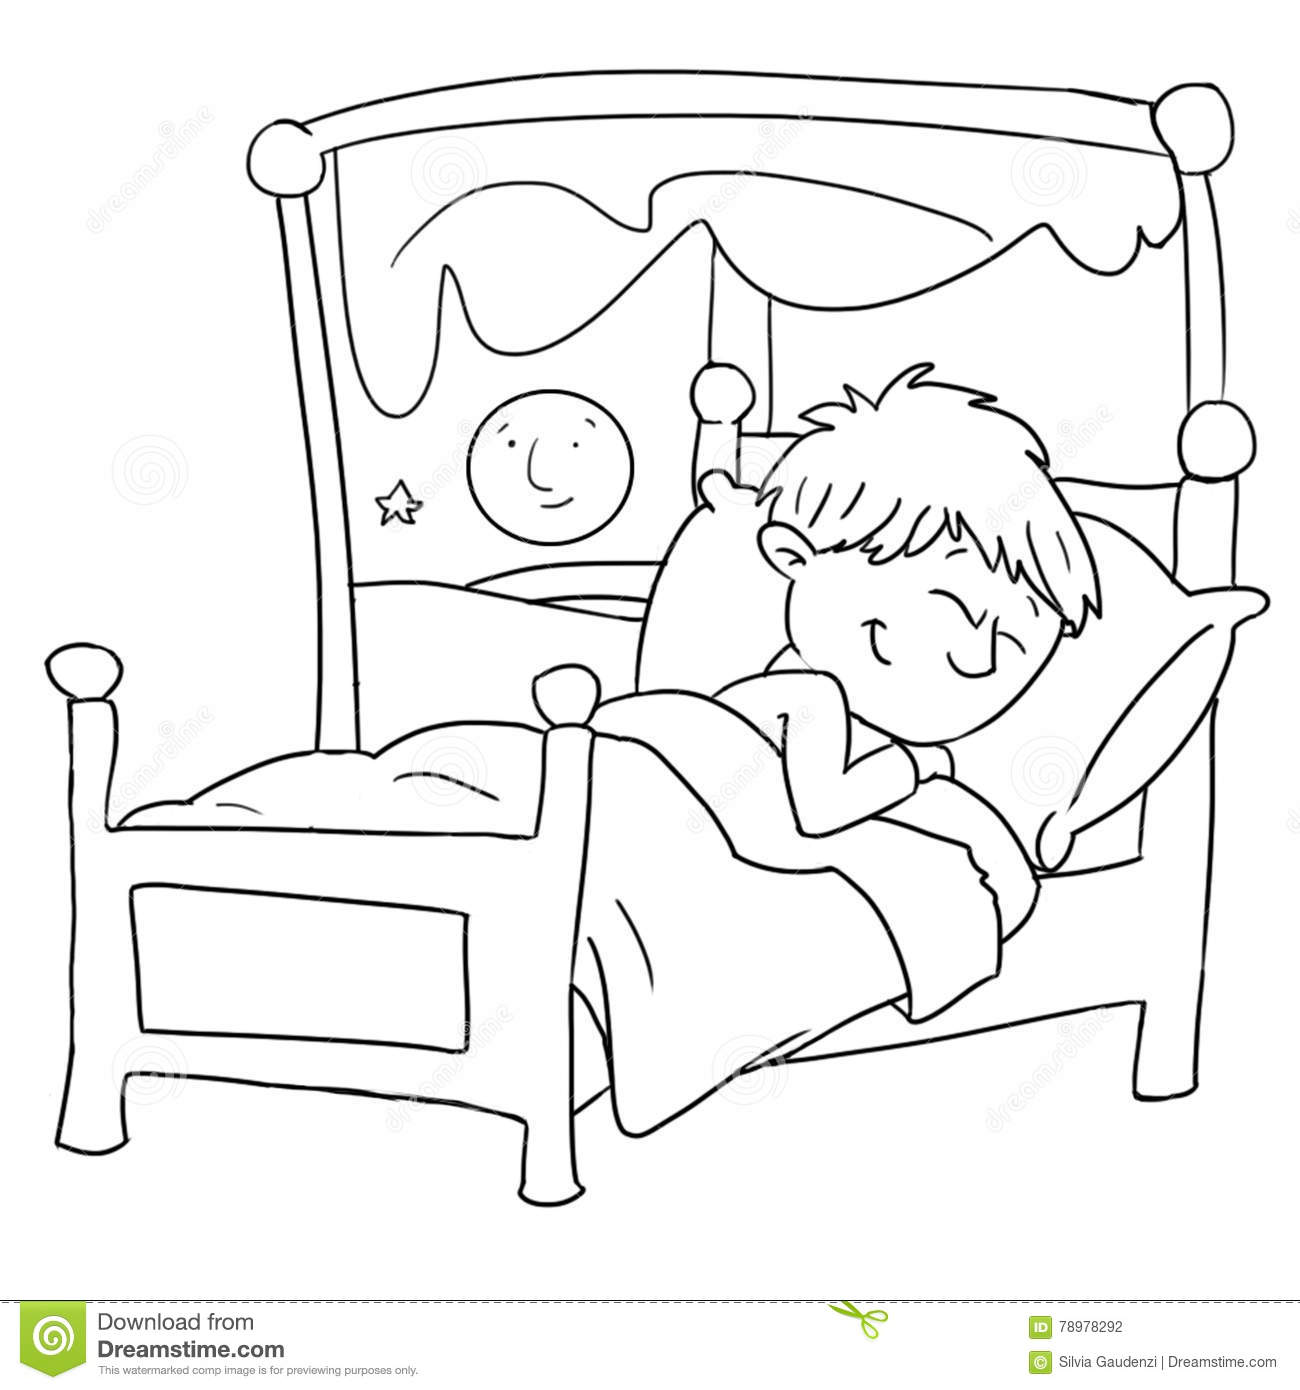 Baby sleeping clipart black and white